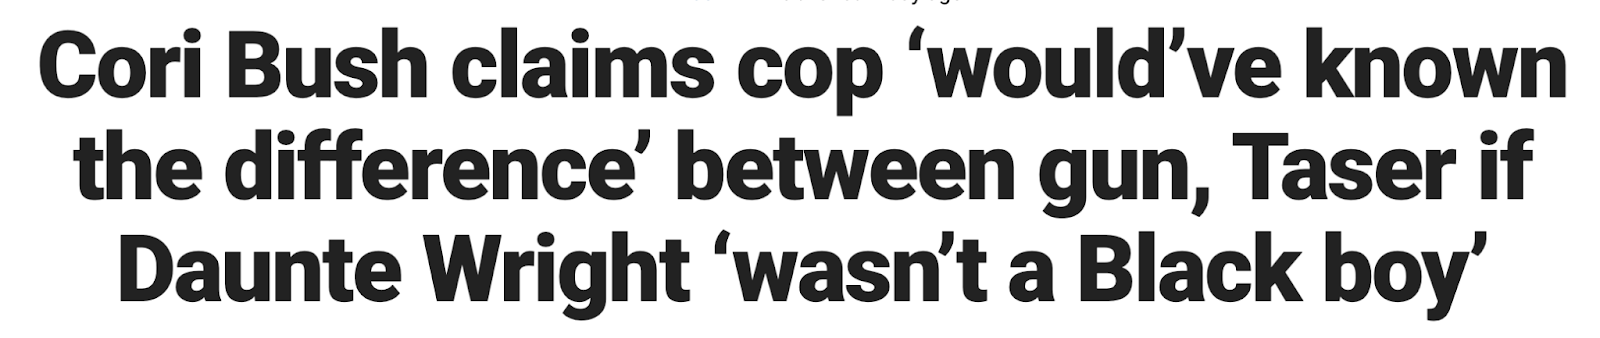 Headline: Cori Bush claims cop 'would've known the difference' between gun, Taser if Daunte Wright 'wasn't a Black boy'